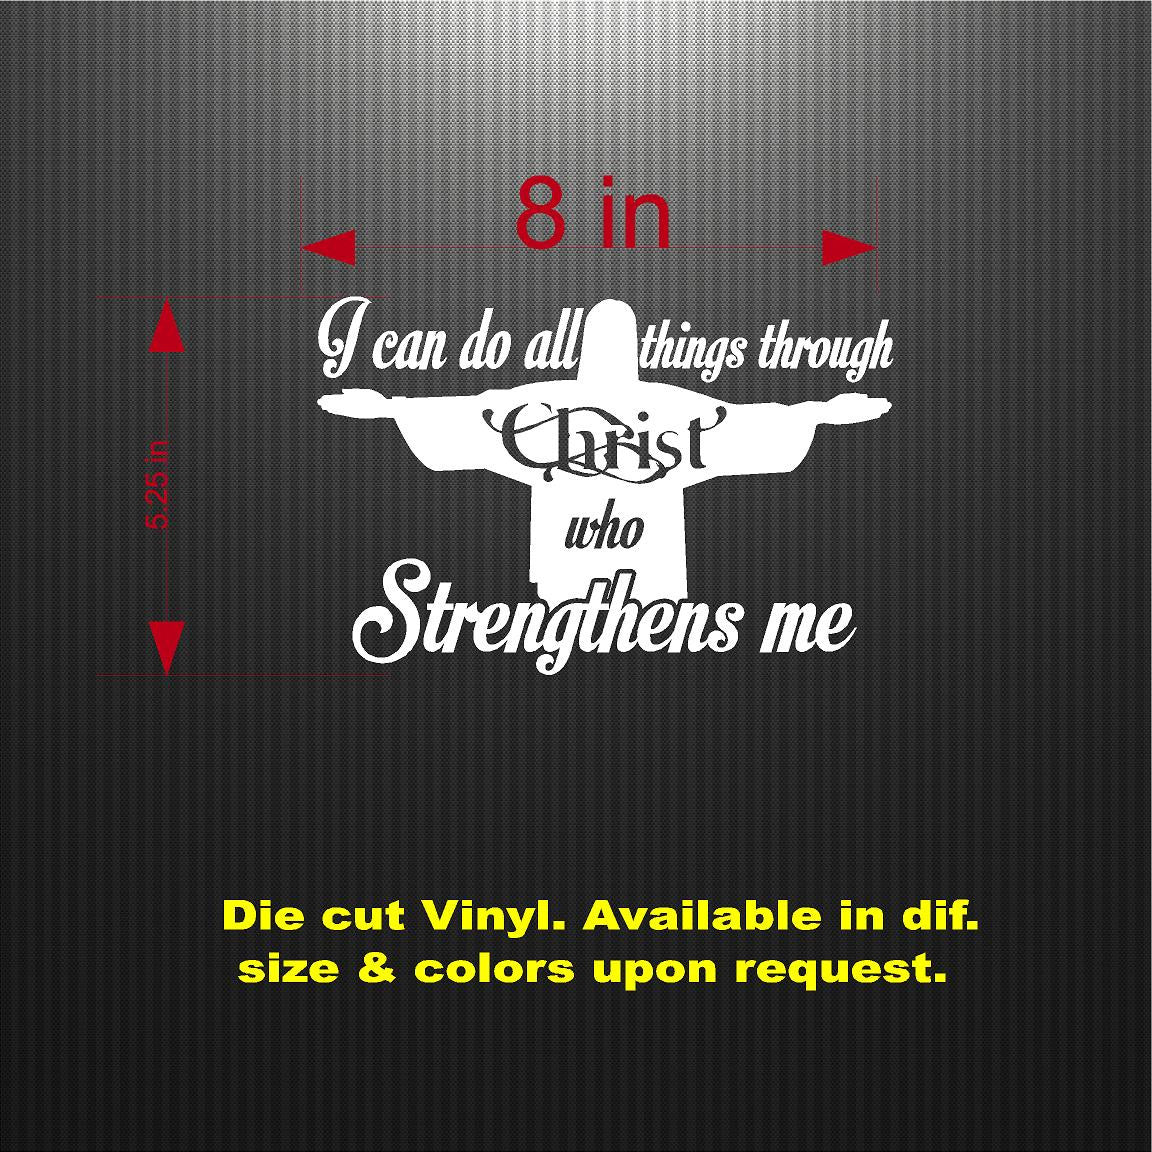 Decals - Religious - Philippians 4:13 I can do all things through Christ who strengthens me.